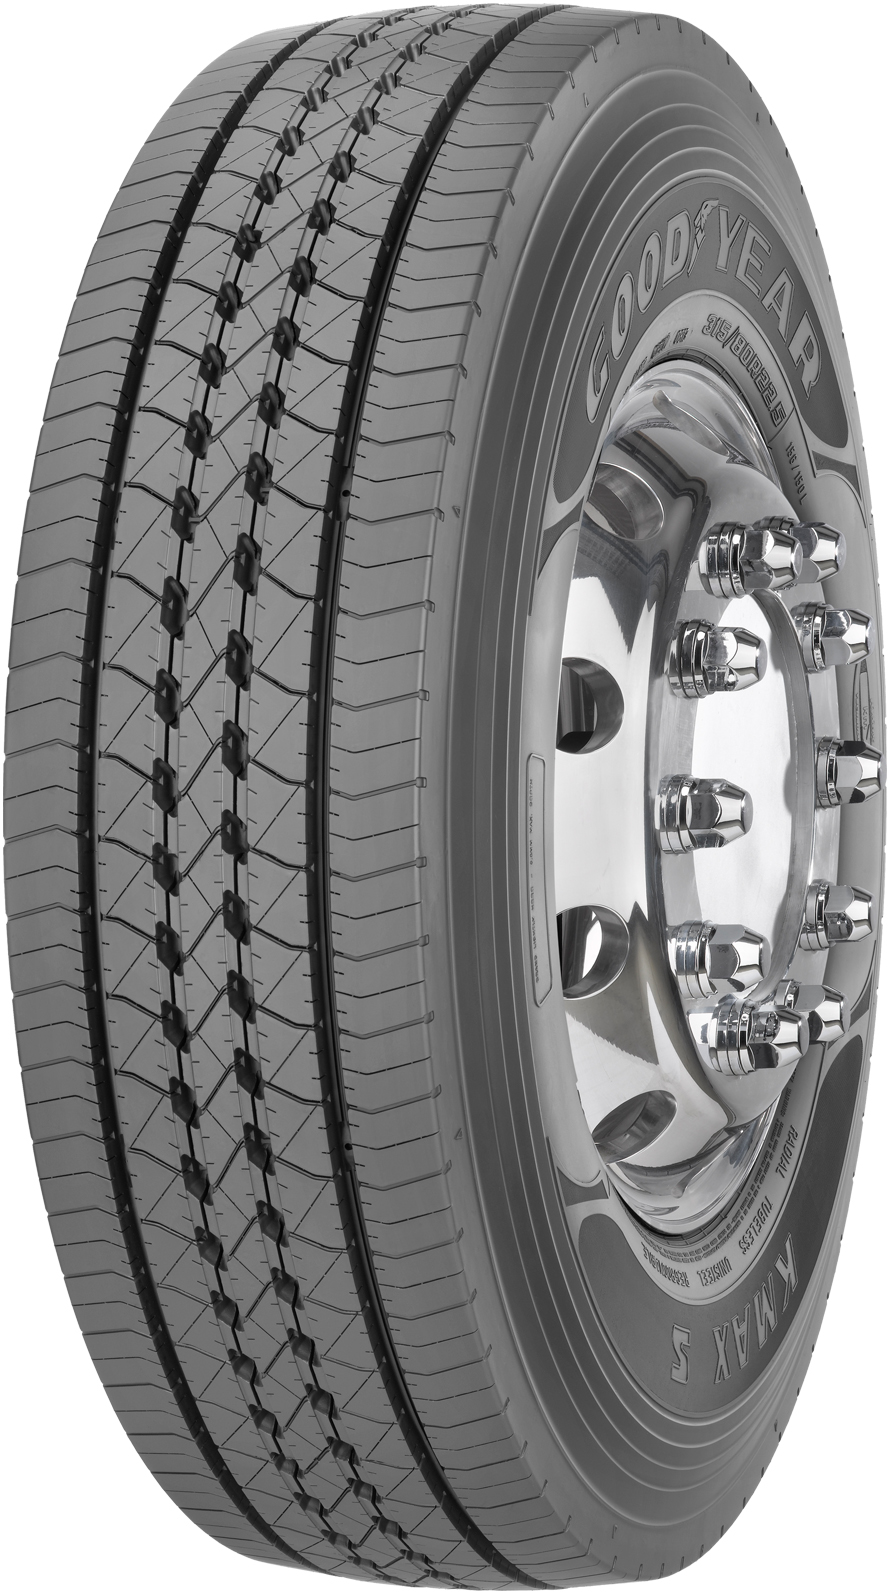 product_type-heavy_tires GOODYEAR KMAX S 16 TL 265/70 R19.5 140M